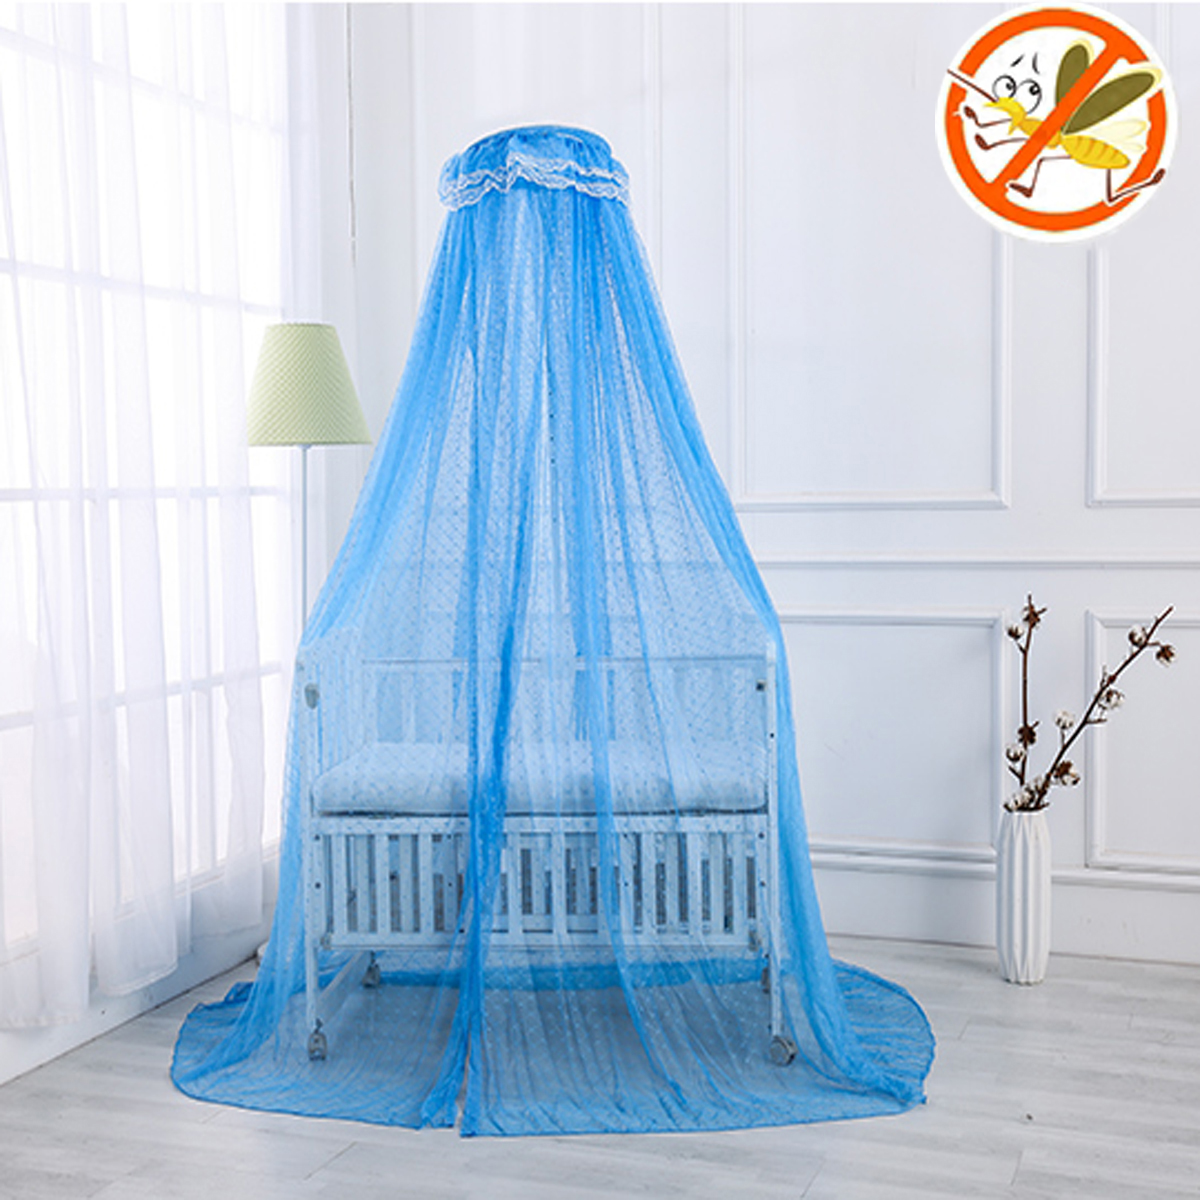 Kids-Baby-Bed-Canopy-Bedcover-Mosquito-Net-Curtain-Bedding-Cotton-Dome-Tent-1353509-10